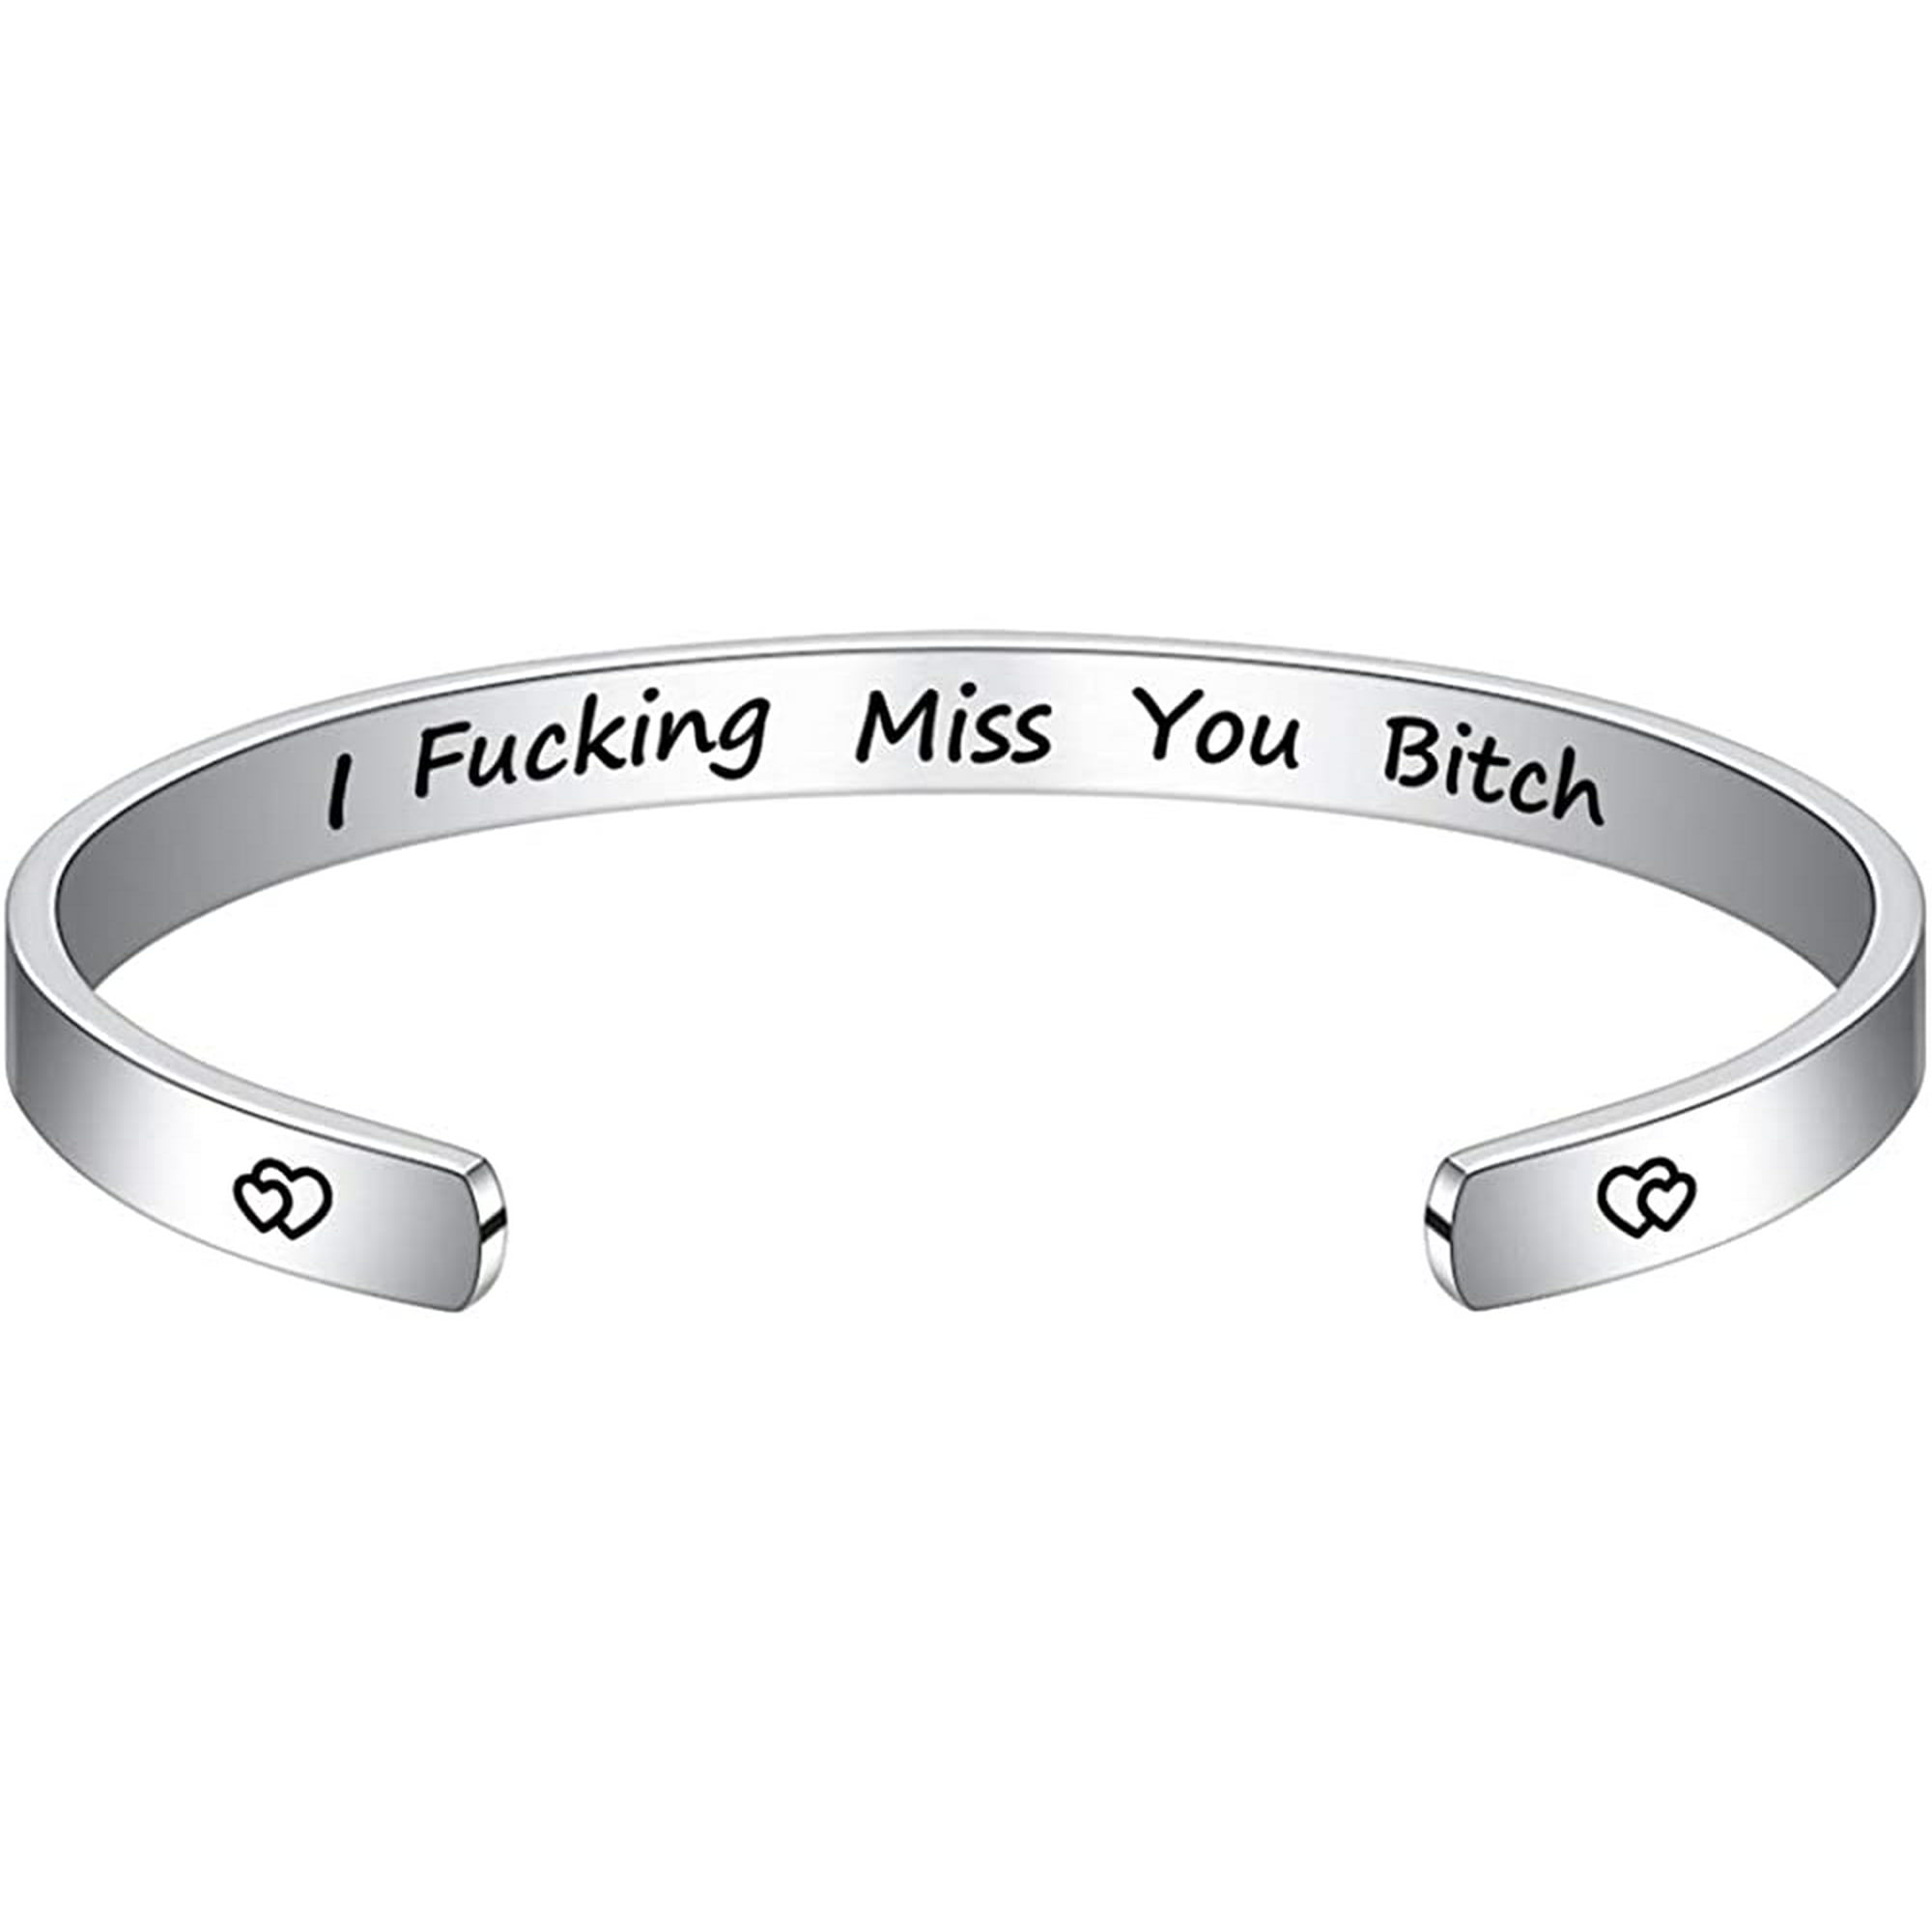 Bracelets for Women Personalized Gifts - Engraved Quote Inspirational  Bracelet Birthday Christmas Funny Gifts for Best Friend, Daughter, Son,  Sister, Niece, Mom, Coworkers, Stainless Steel Jewelry | Walmart Canada